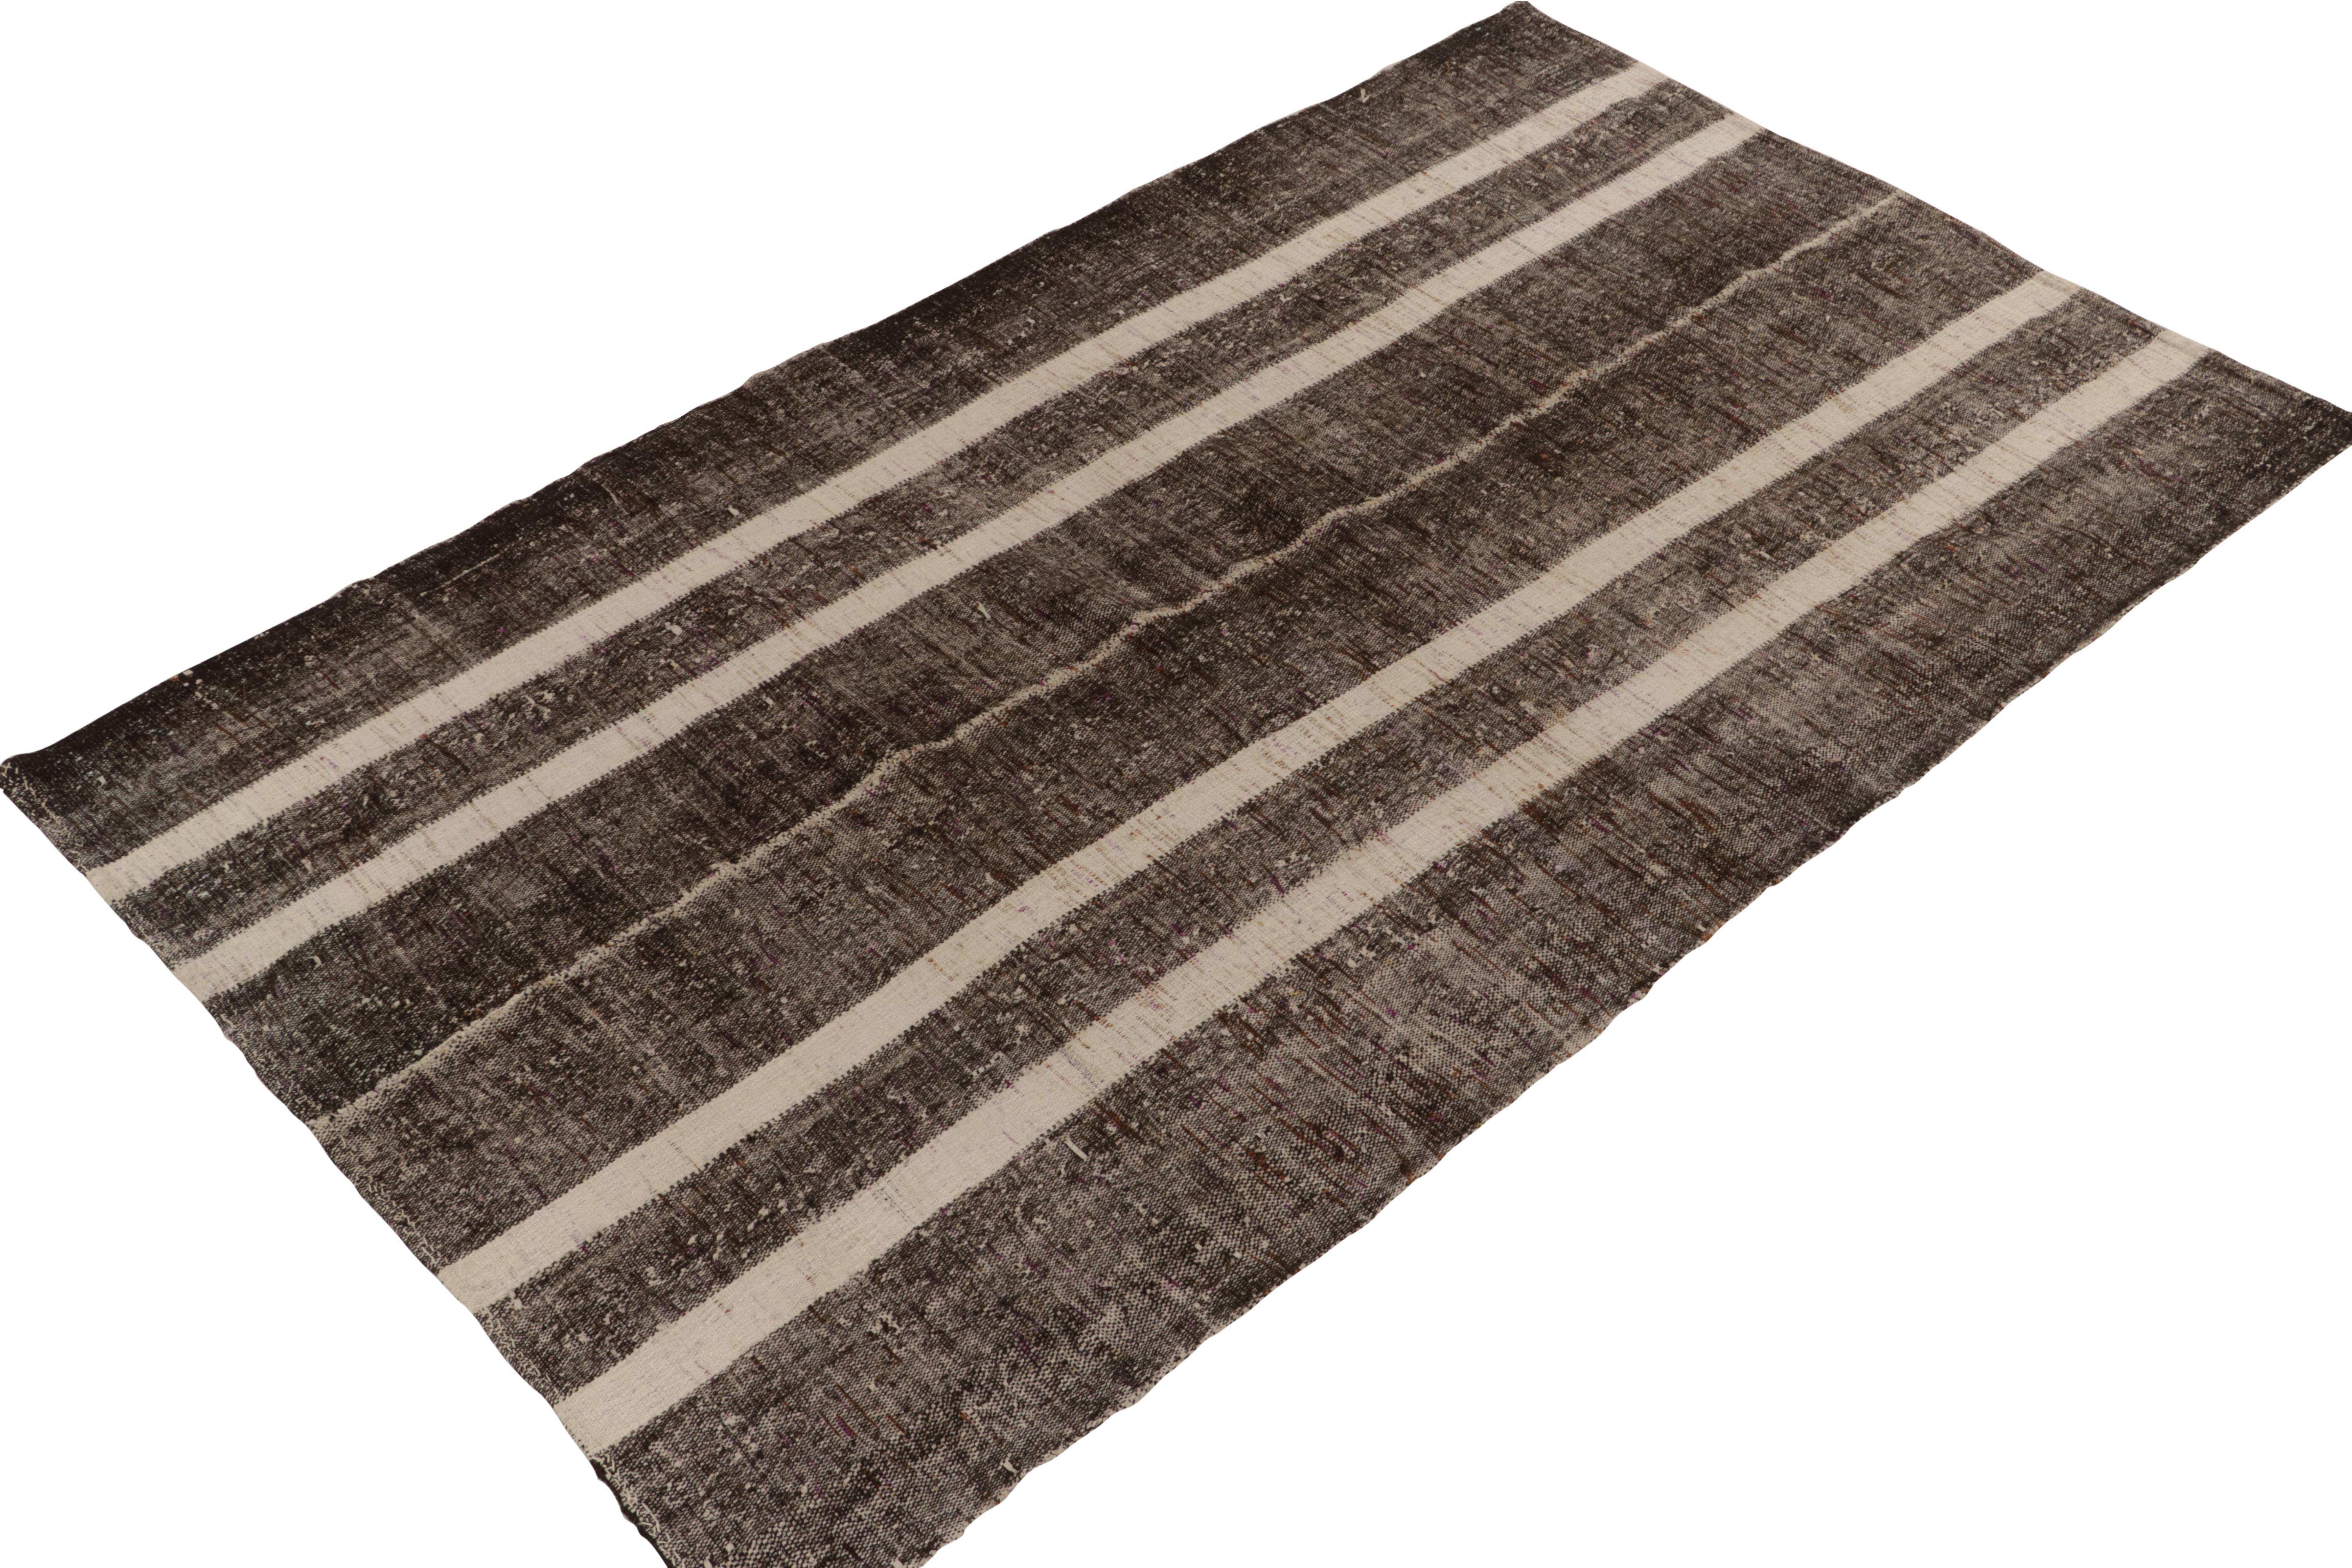 Originating between 1950-1960, a 6x10 vintage kilim rug from Turkey. Handwoven in wool with panel weaving technique, the simple design enjoys a neutral play of beige-brown with a salt-and-pepper white-and-black element in the striations. A close